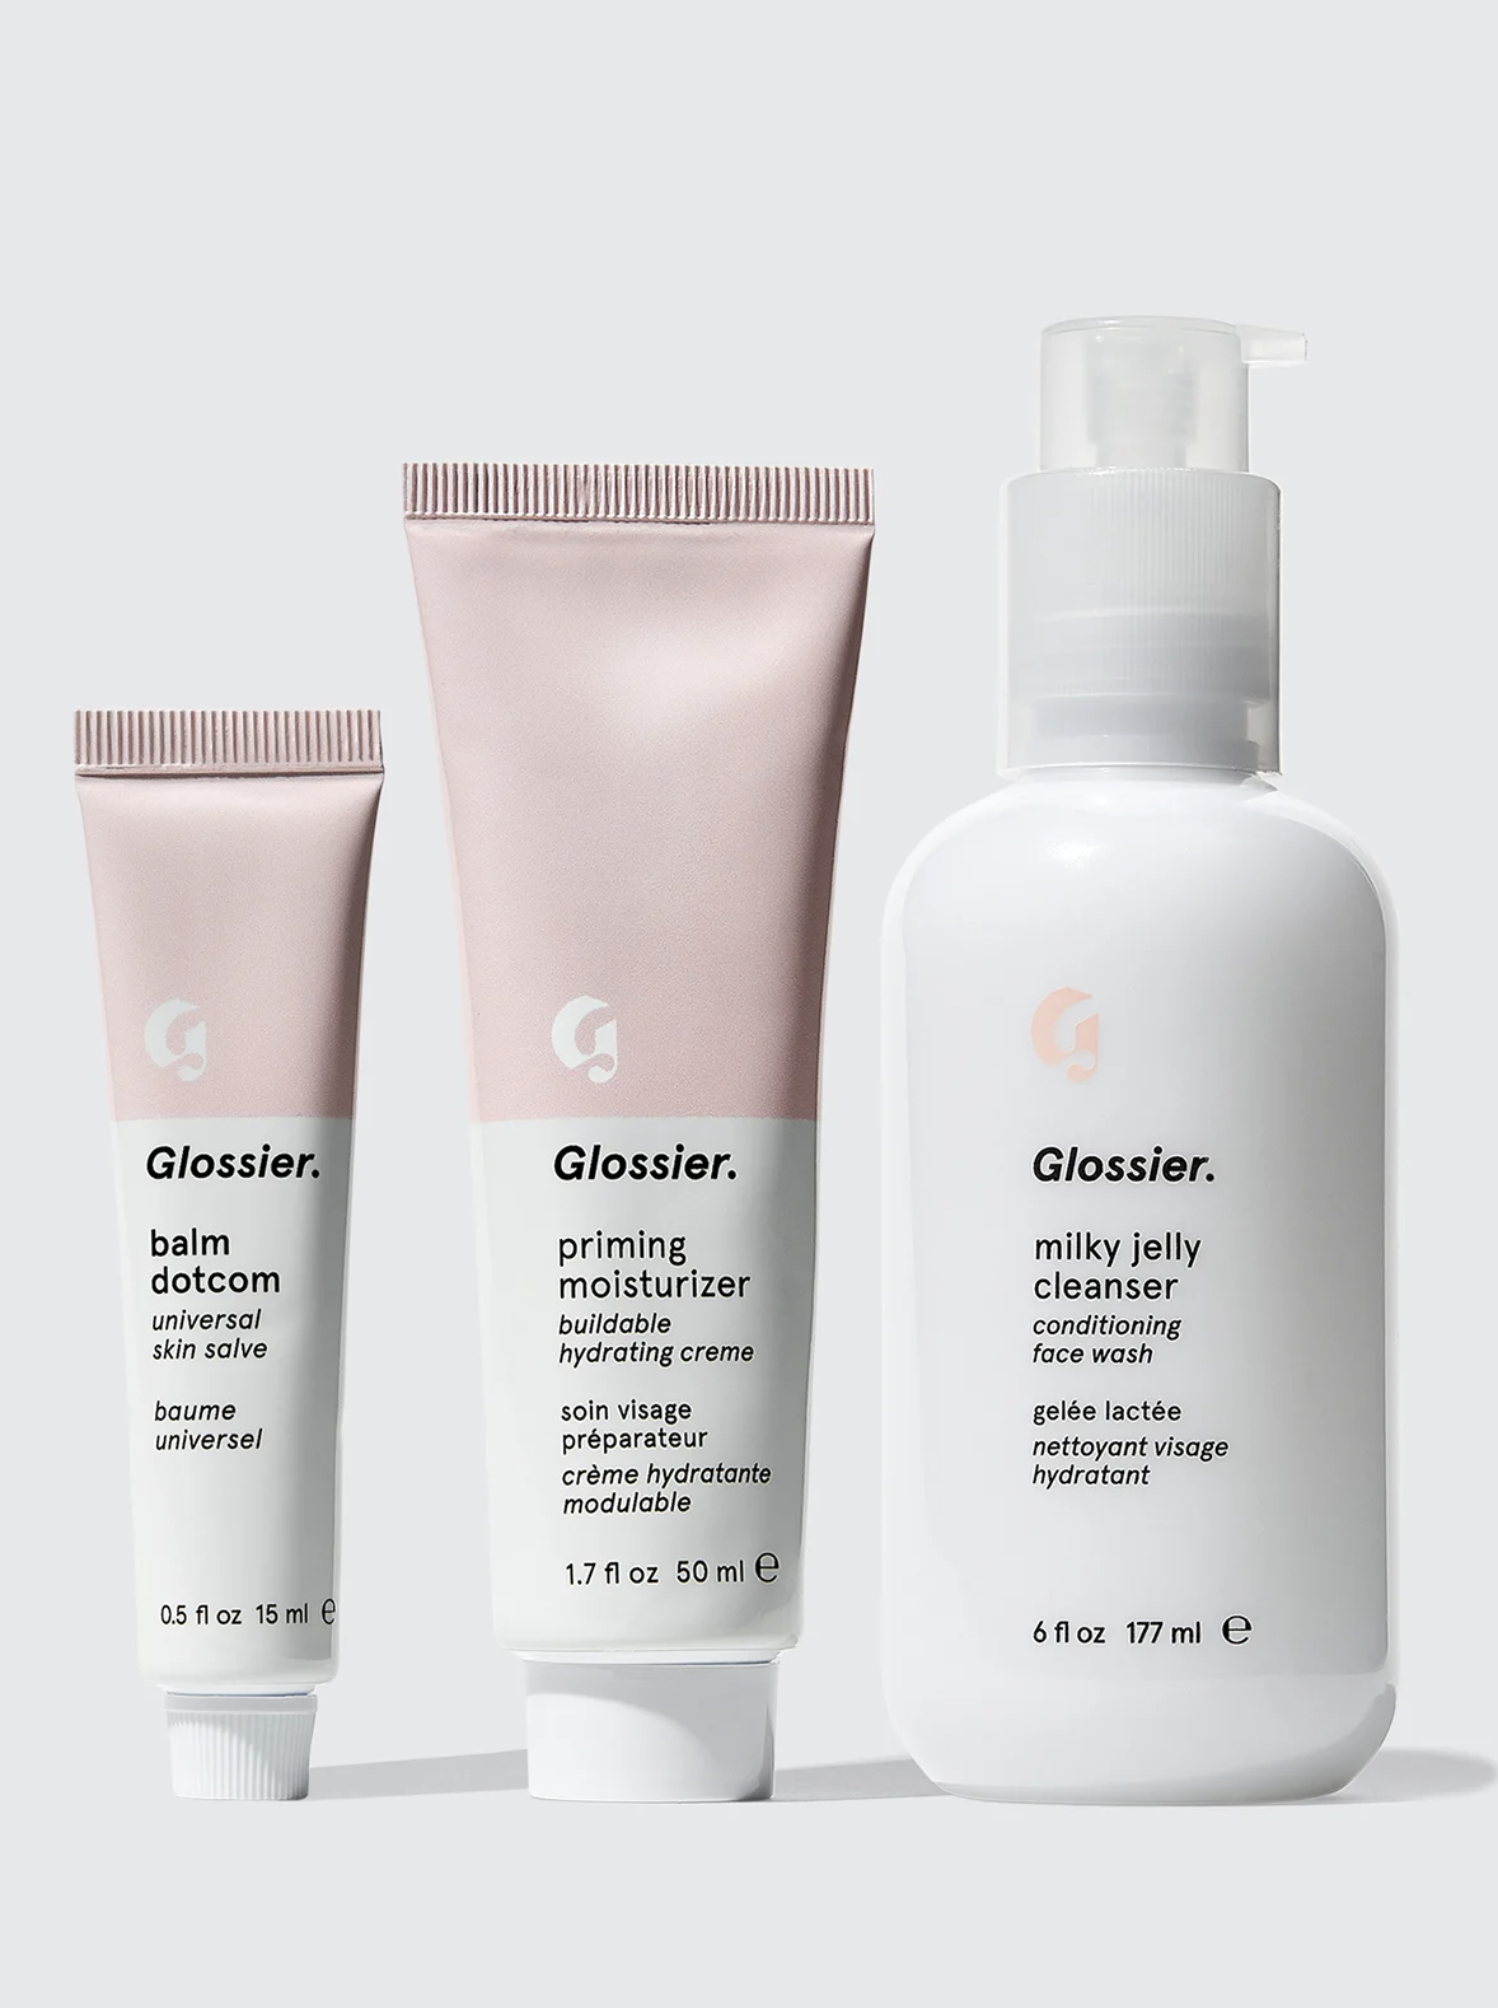 The squeezable Balm Dotcom and Priming Moisturizer tubes alongside the Milky Jelly Cleanser bottle